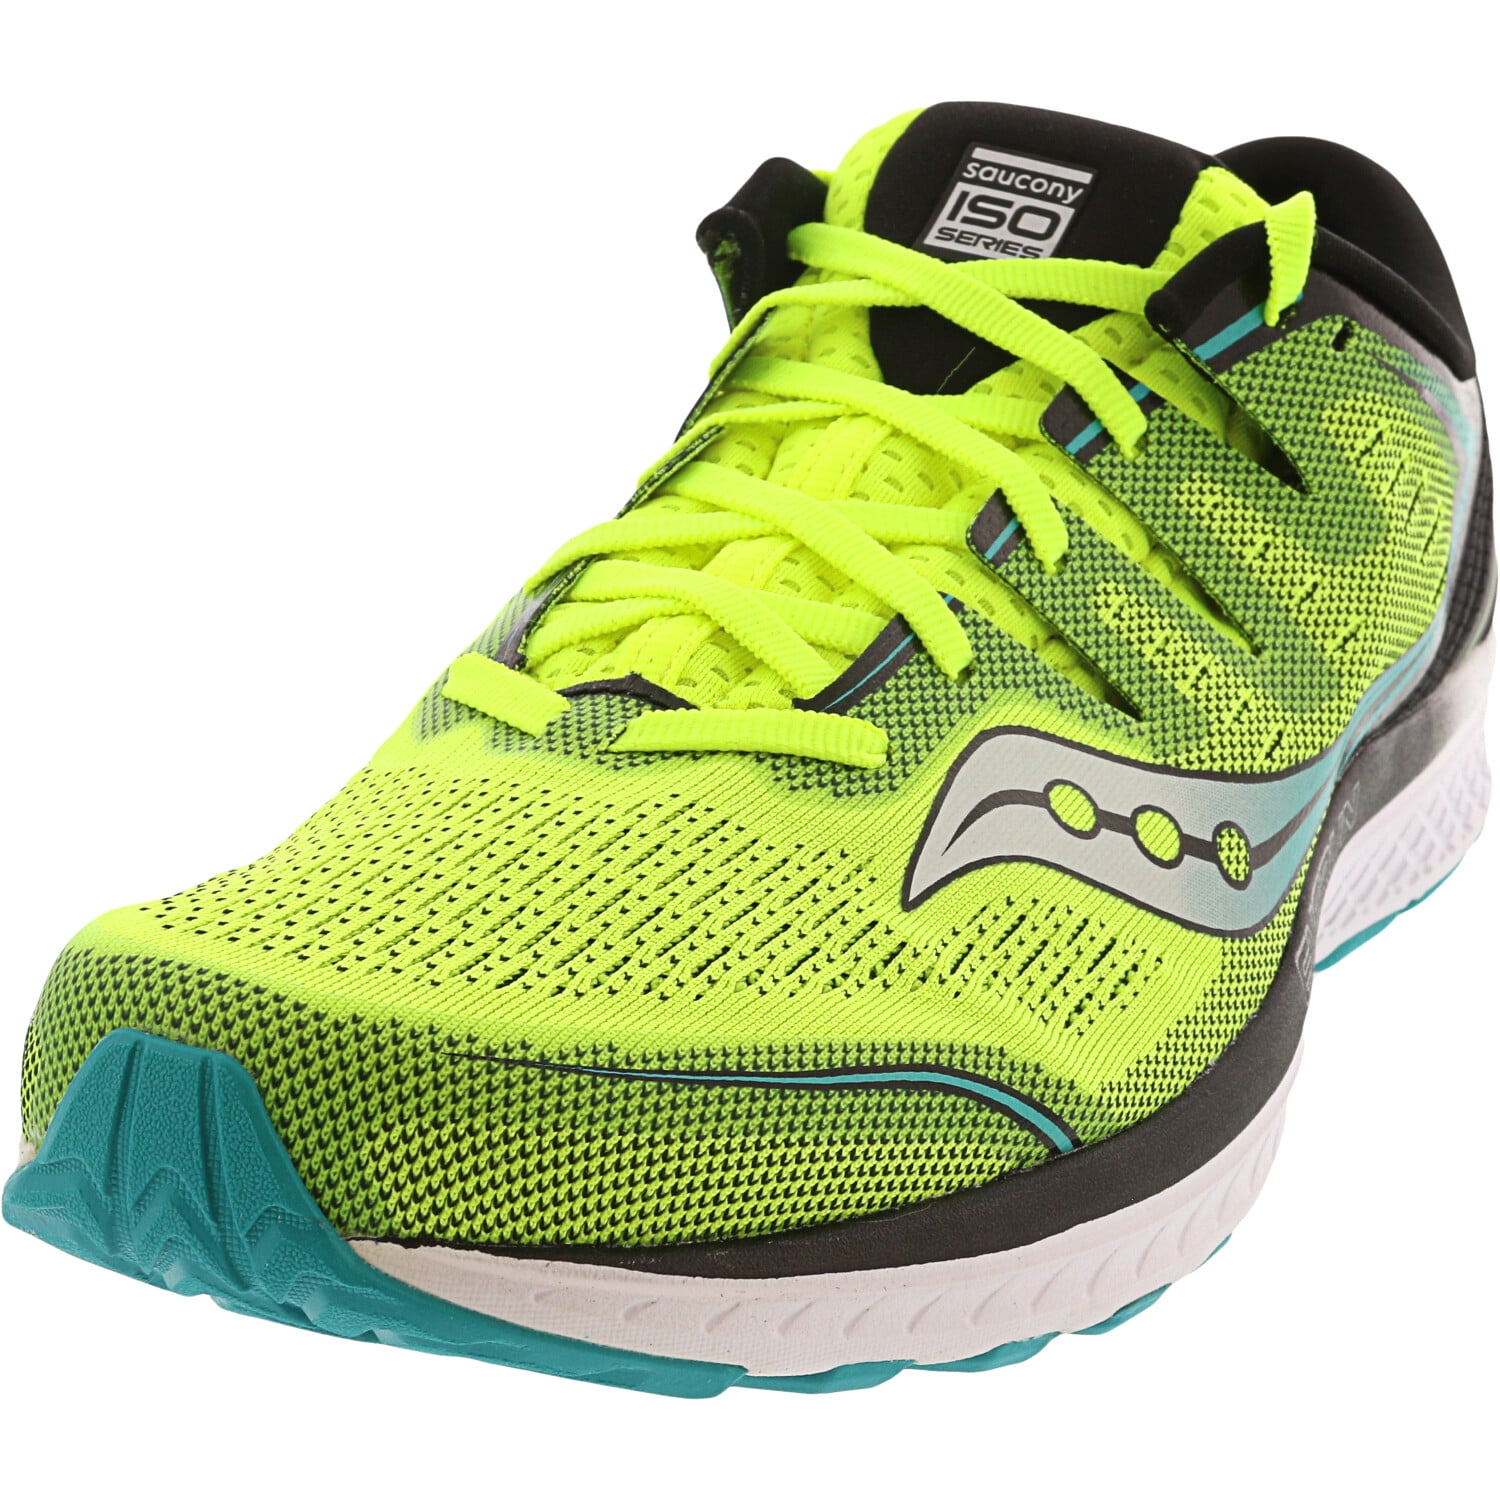 Saucony Mens Guide ISO 2 Running Shoes Trainers Sneakers Green Sports Breathable 